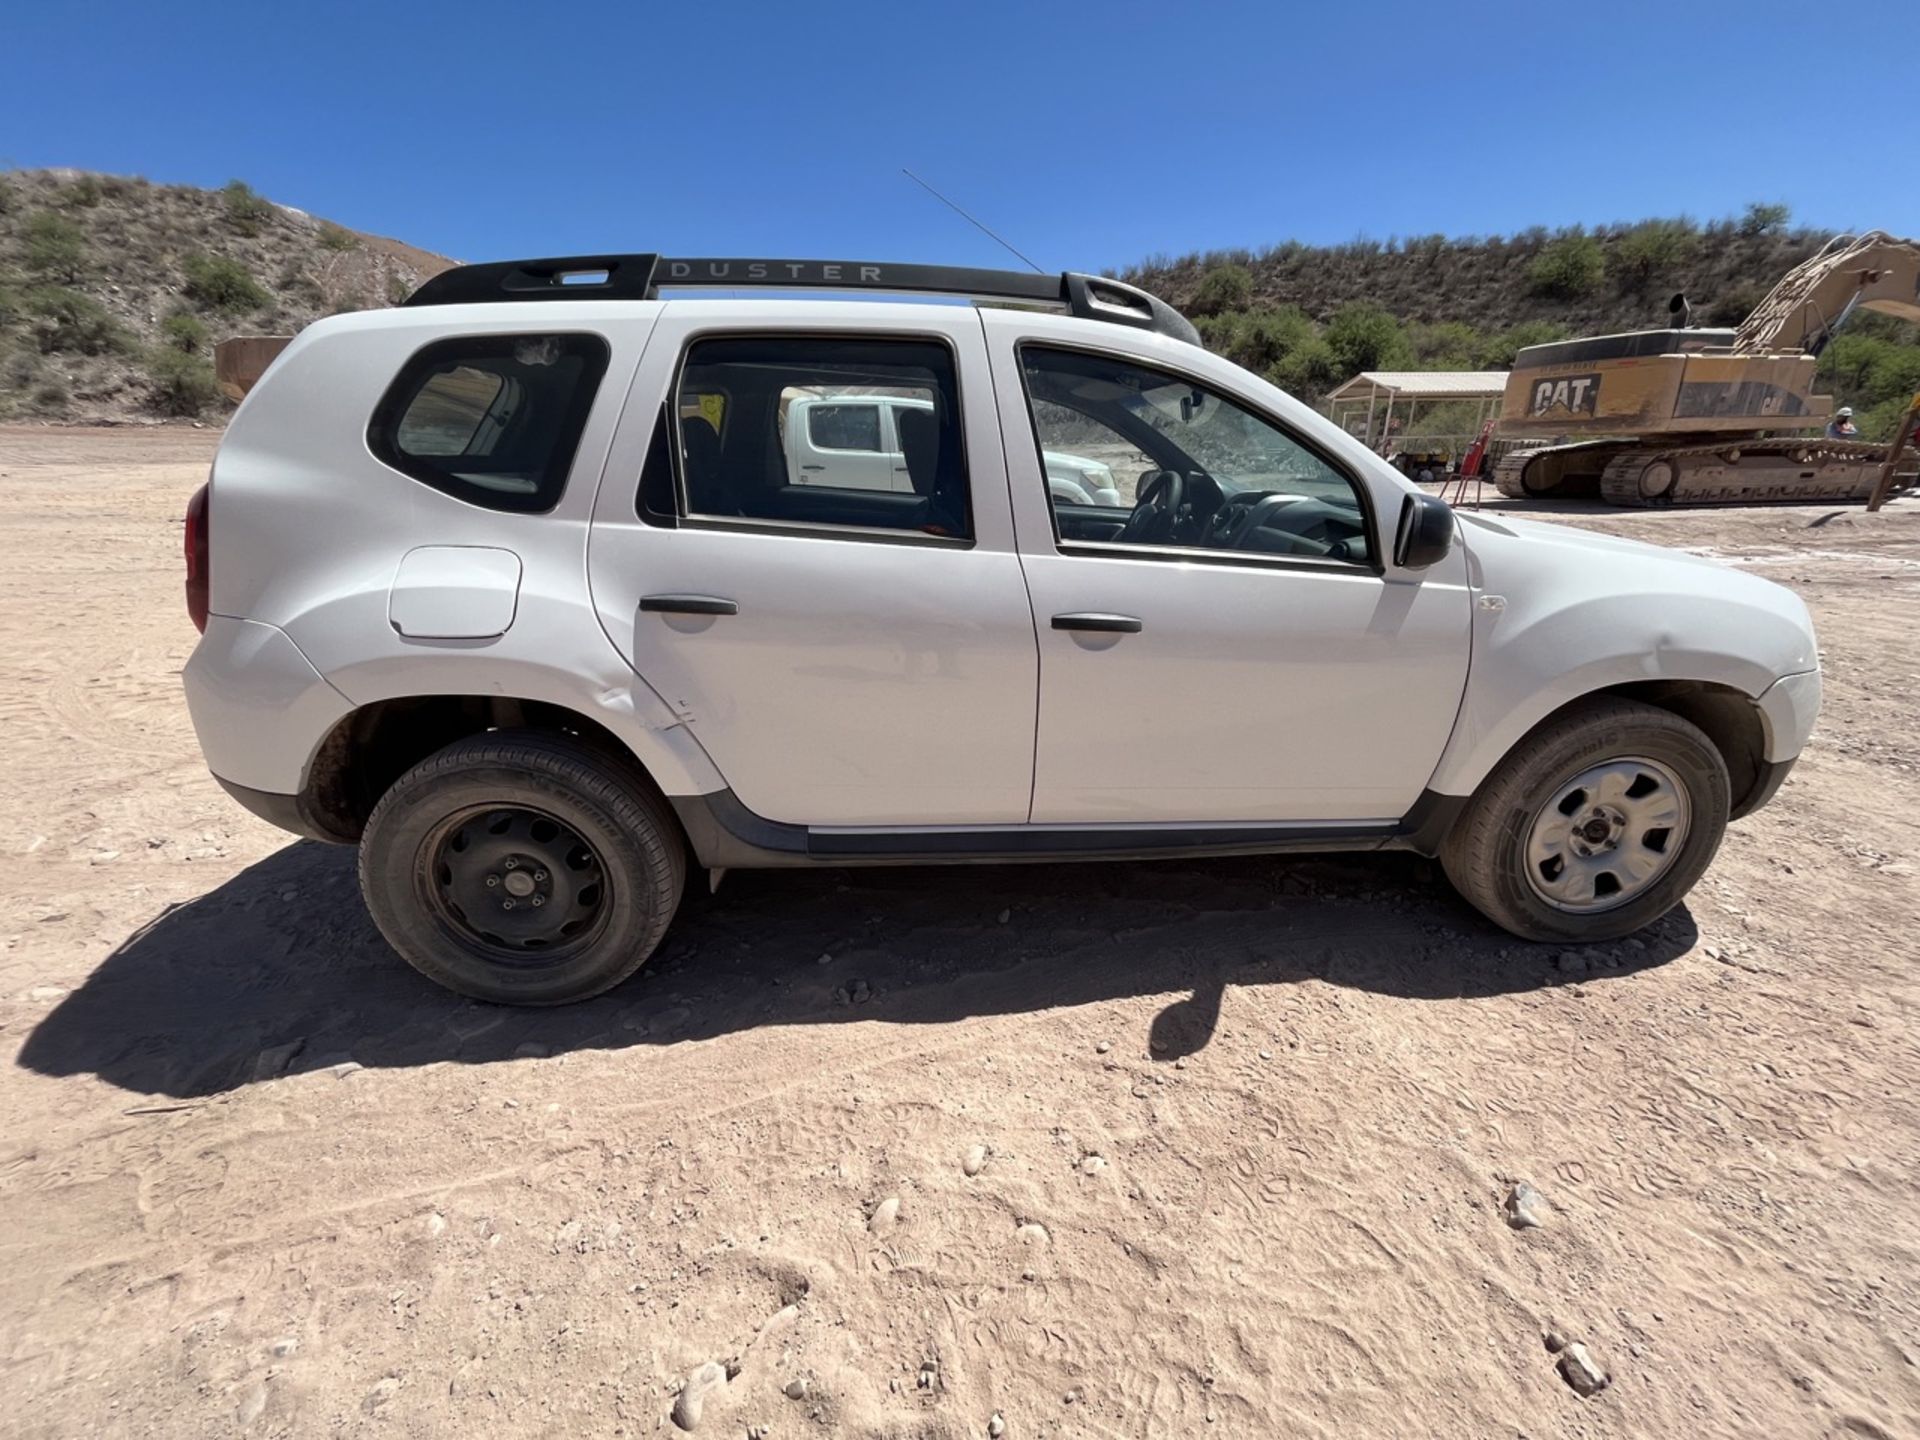 Renault Duster white vehicle, Series 9FBHS1FH4HM590467, Model 2017, automatic transmission, electr - Image 14 of 98